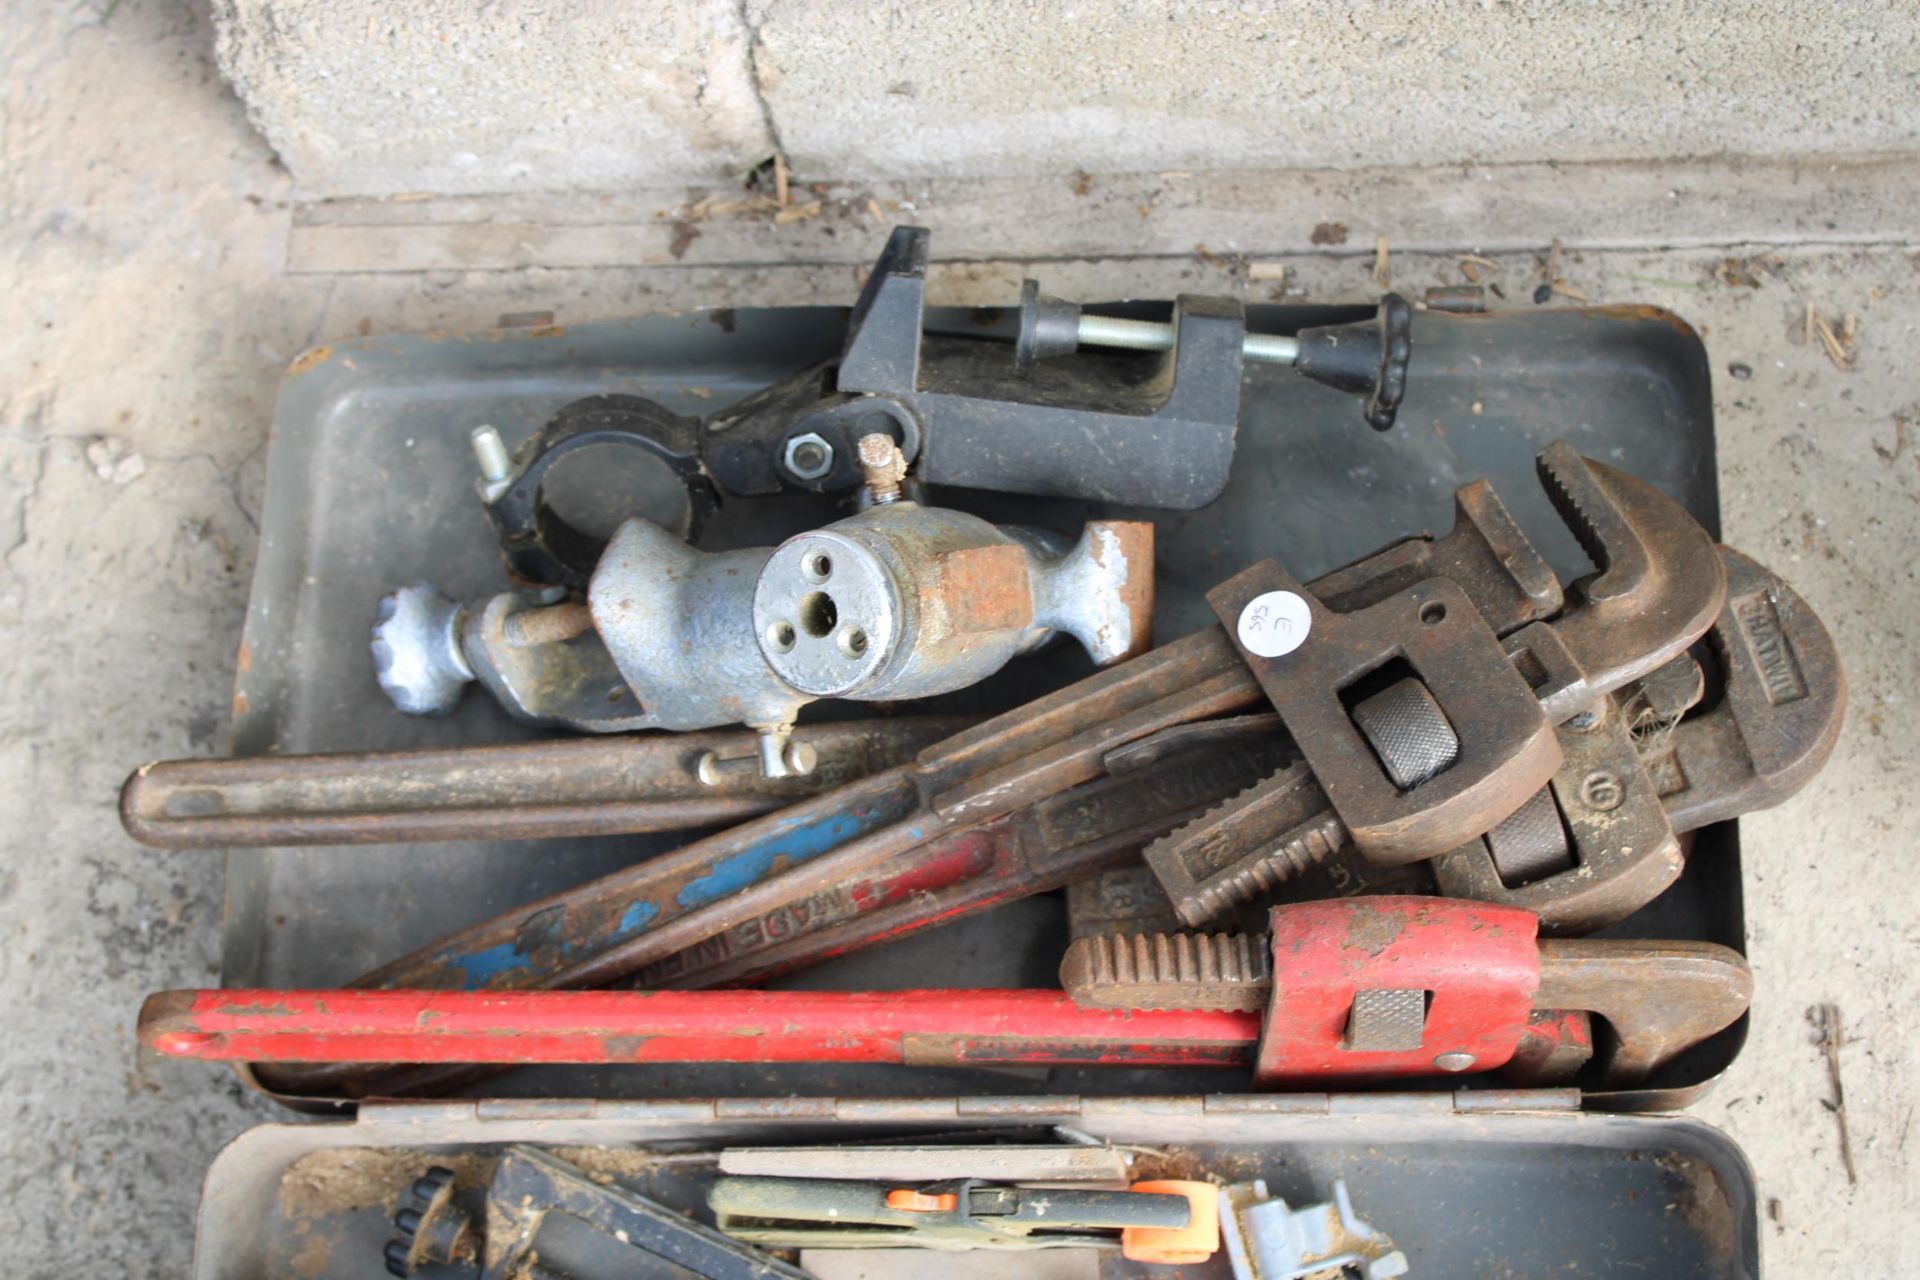 AN ASSORTMENT OF HAND TOOLS TO INCLUDE G CLAMPS AND STILSENS ETC - Image 2 of 2